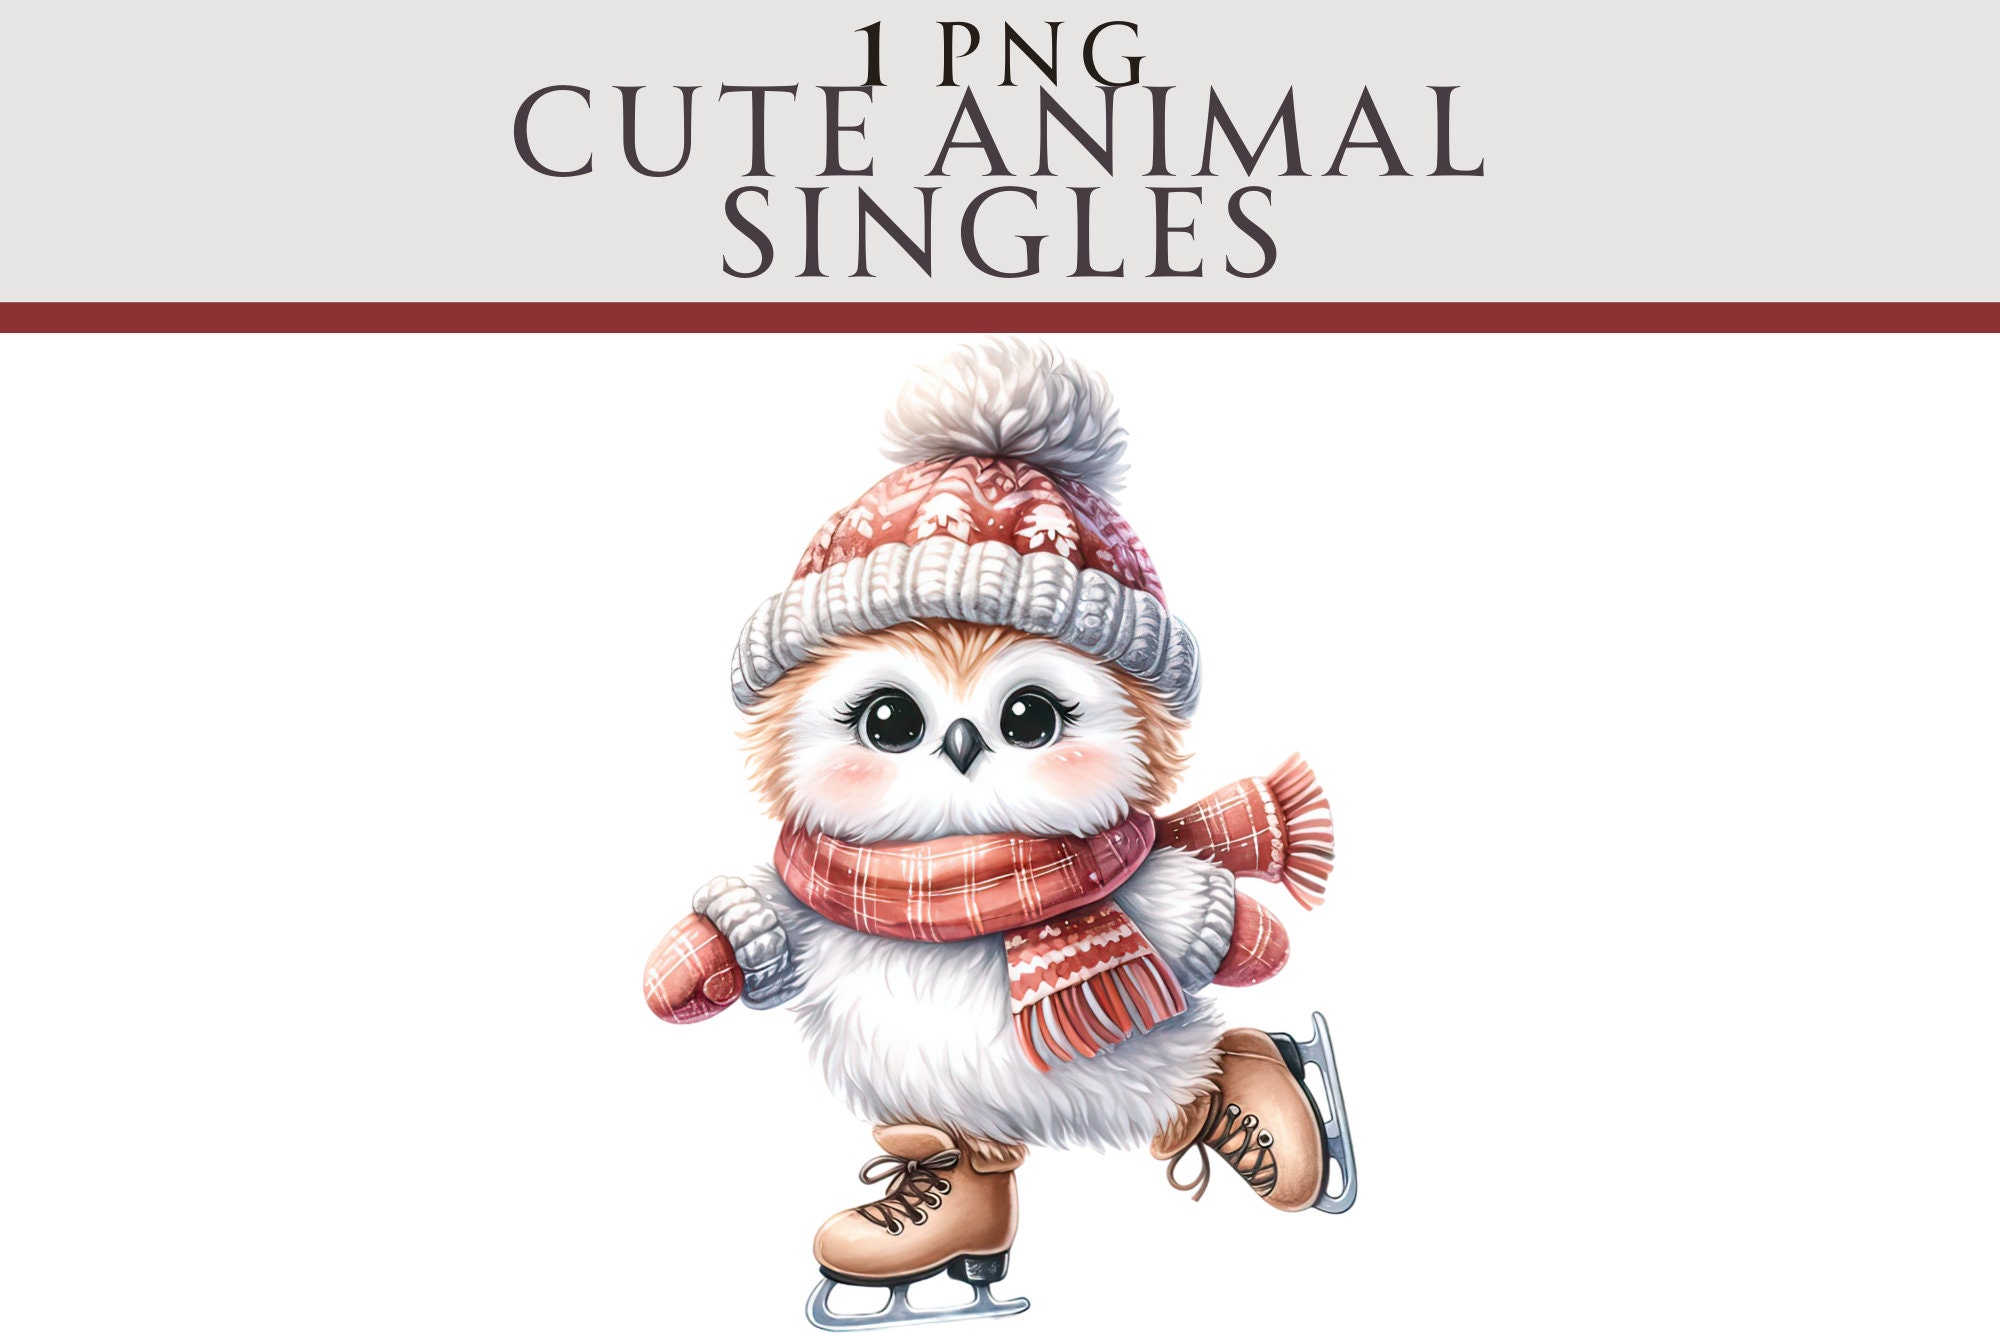 Ice Skating Owl Clipart, Festive Winter PNG, Winter Illustration, Ideal for Greetings Cards, Craftin